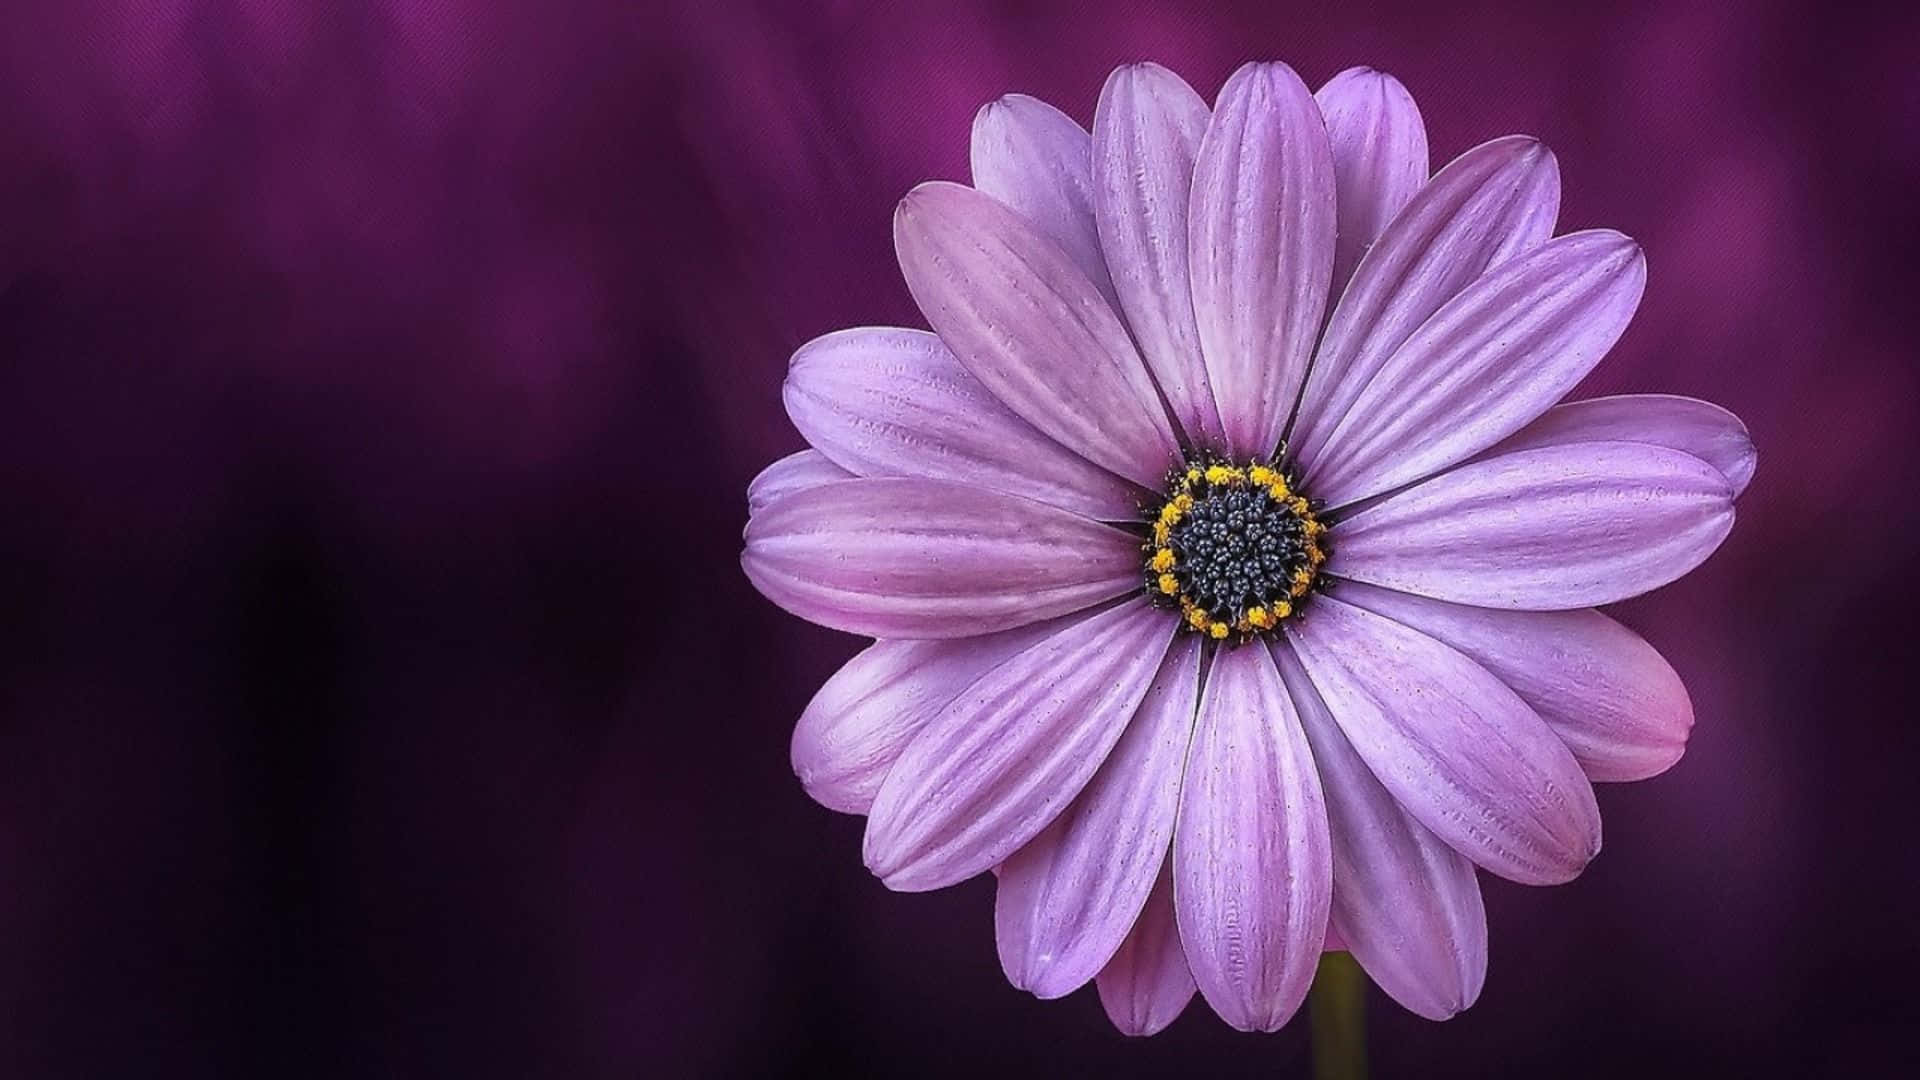 Stay Connected with Daisy Laptop Wallpaper